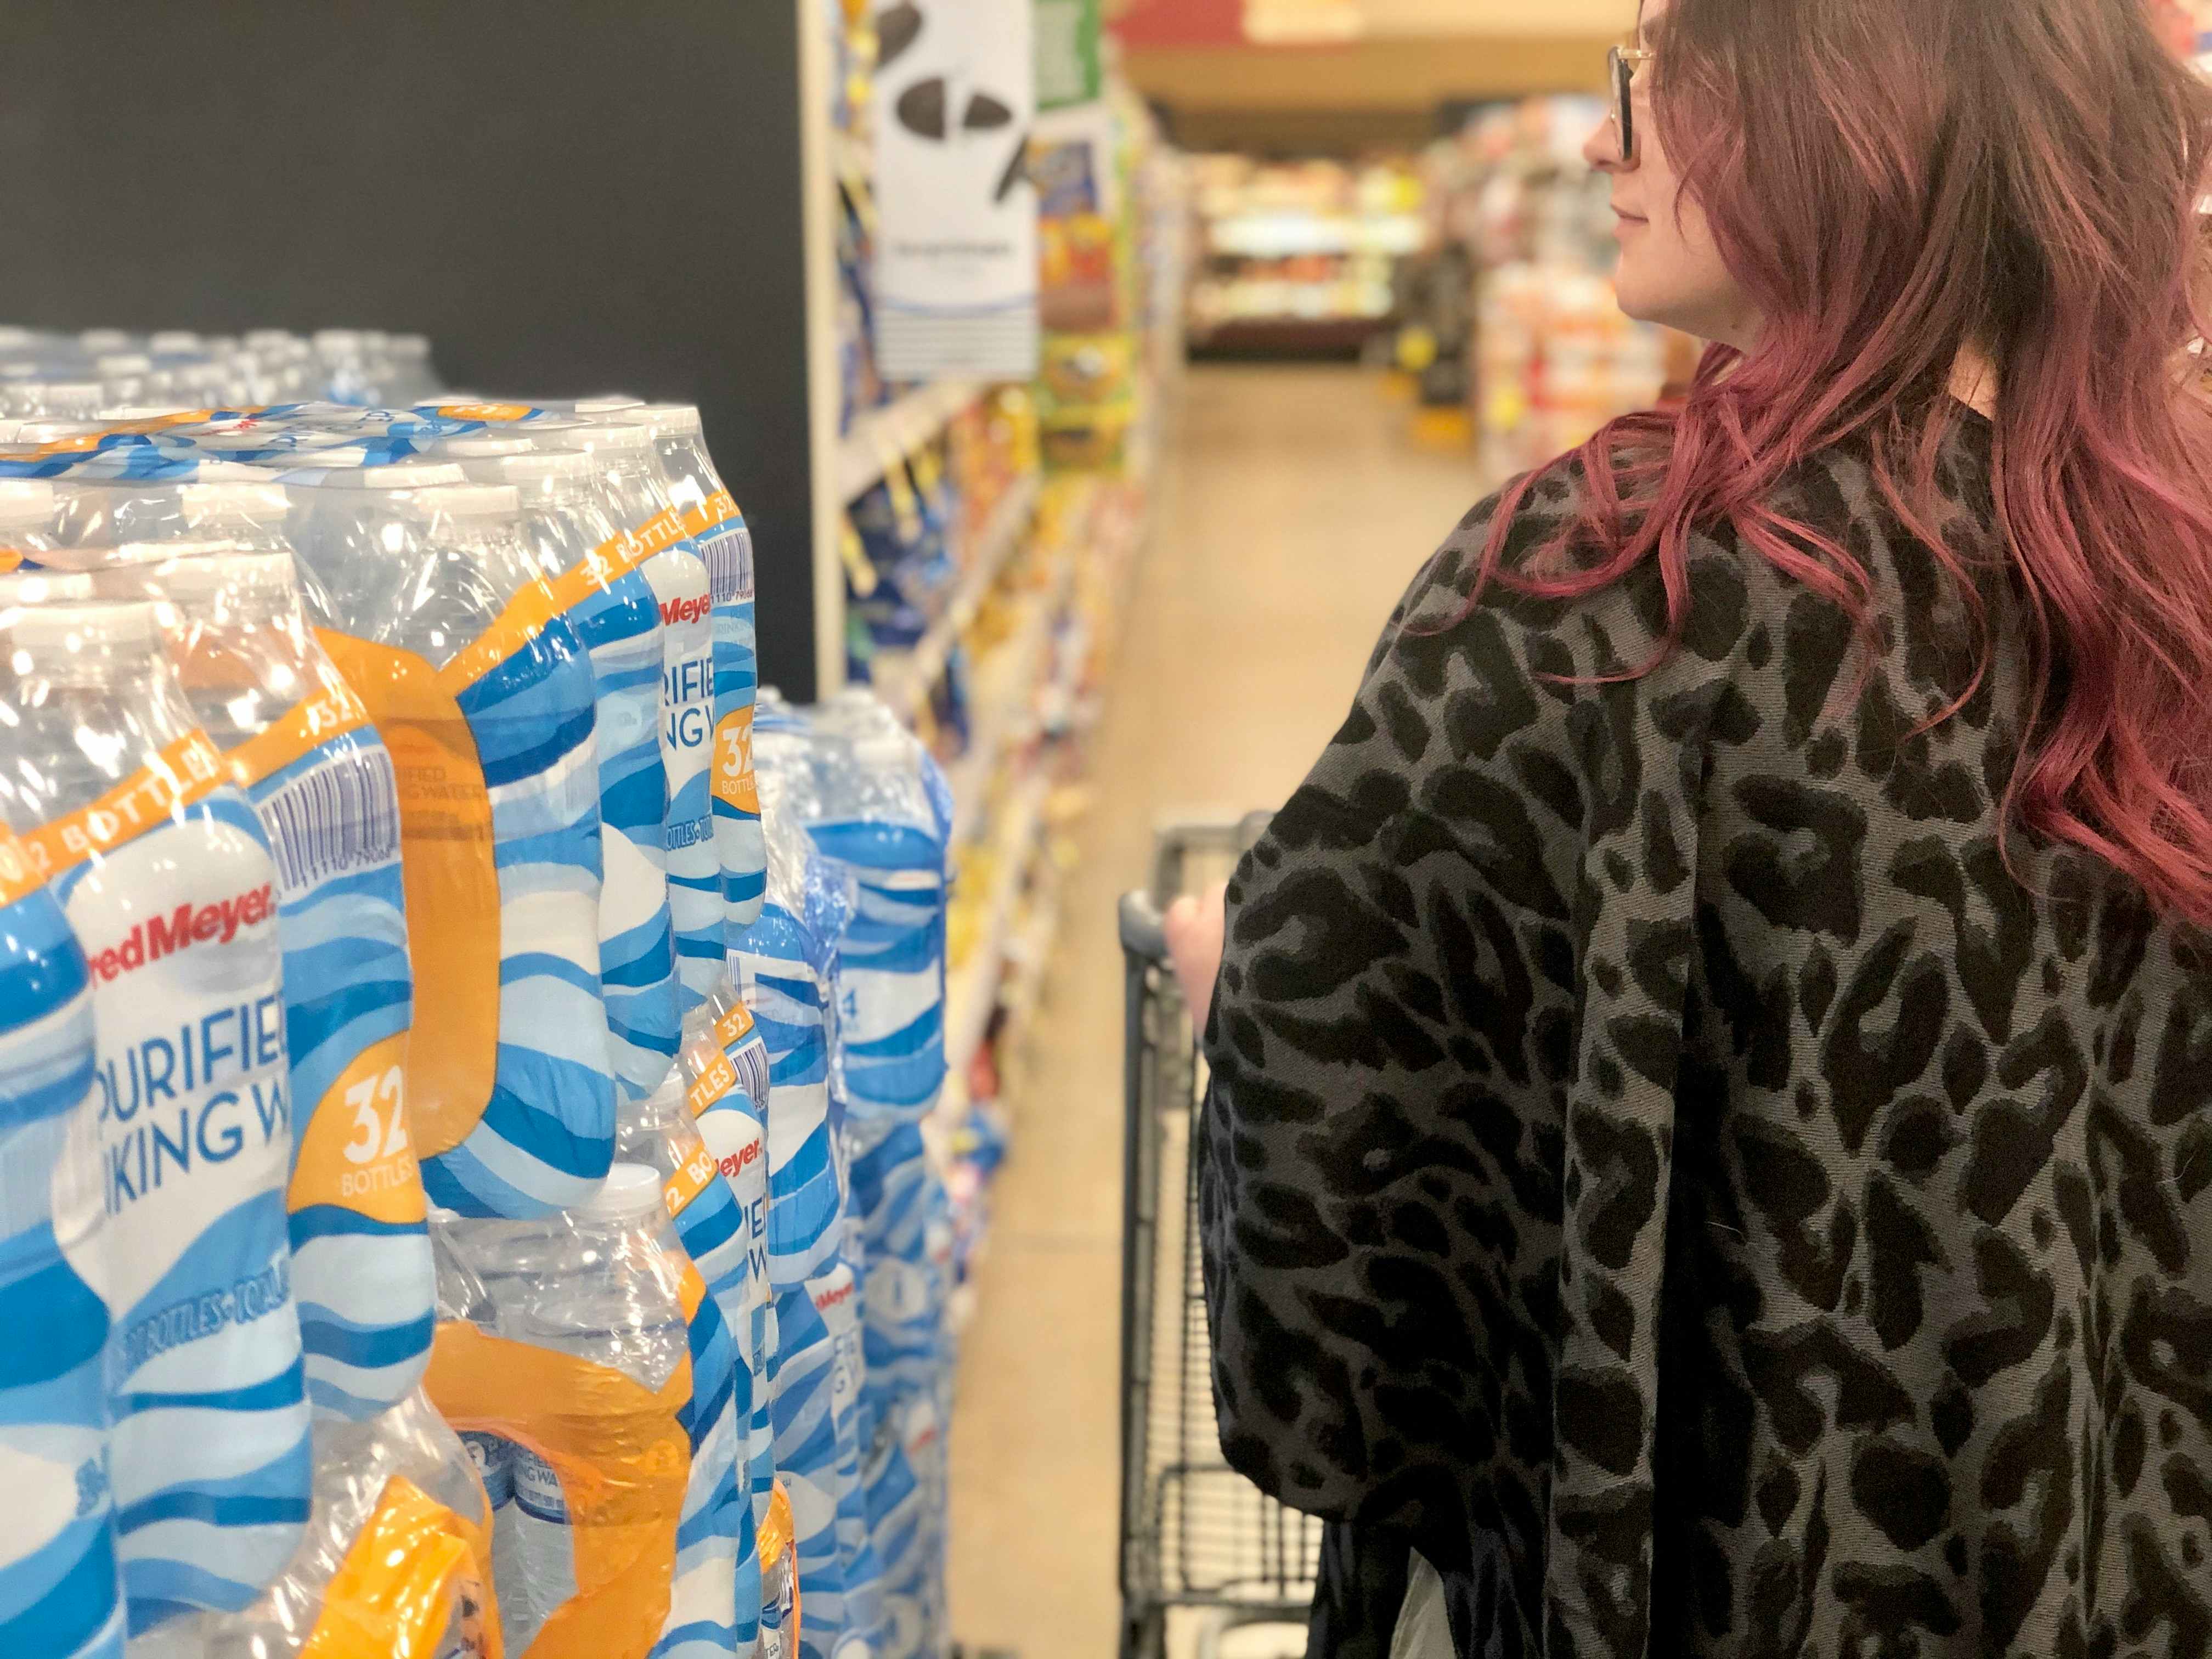 A woman passes by plastic water bottles at the store.